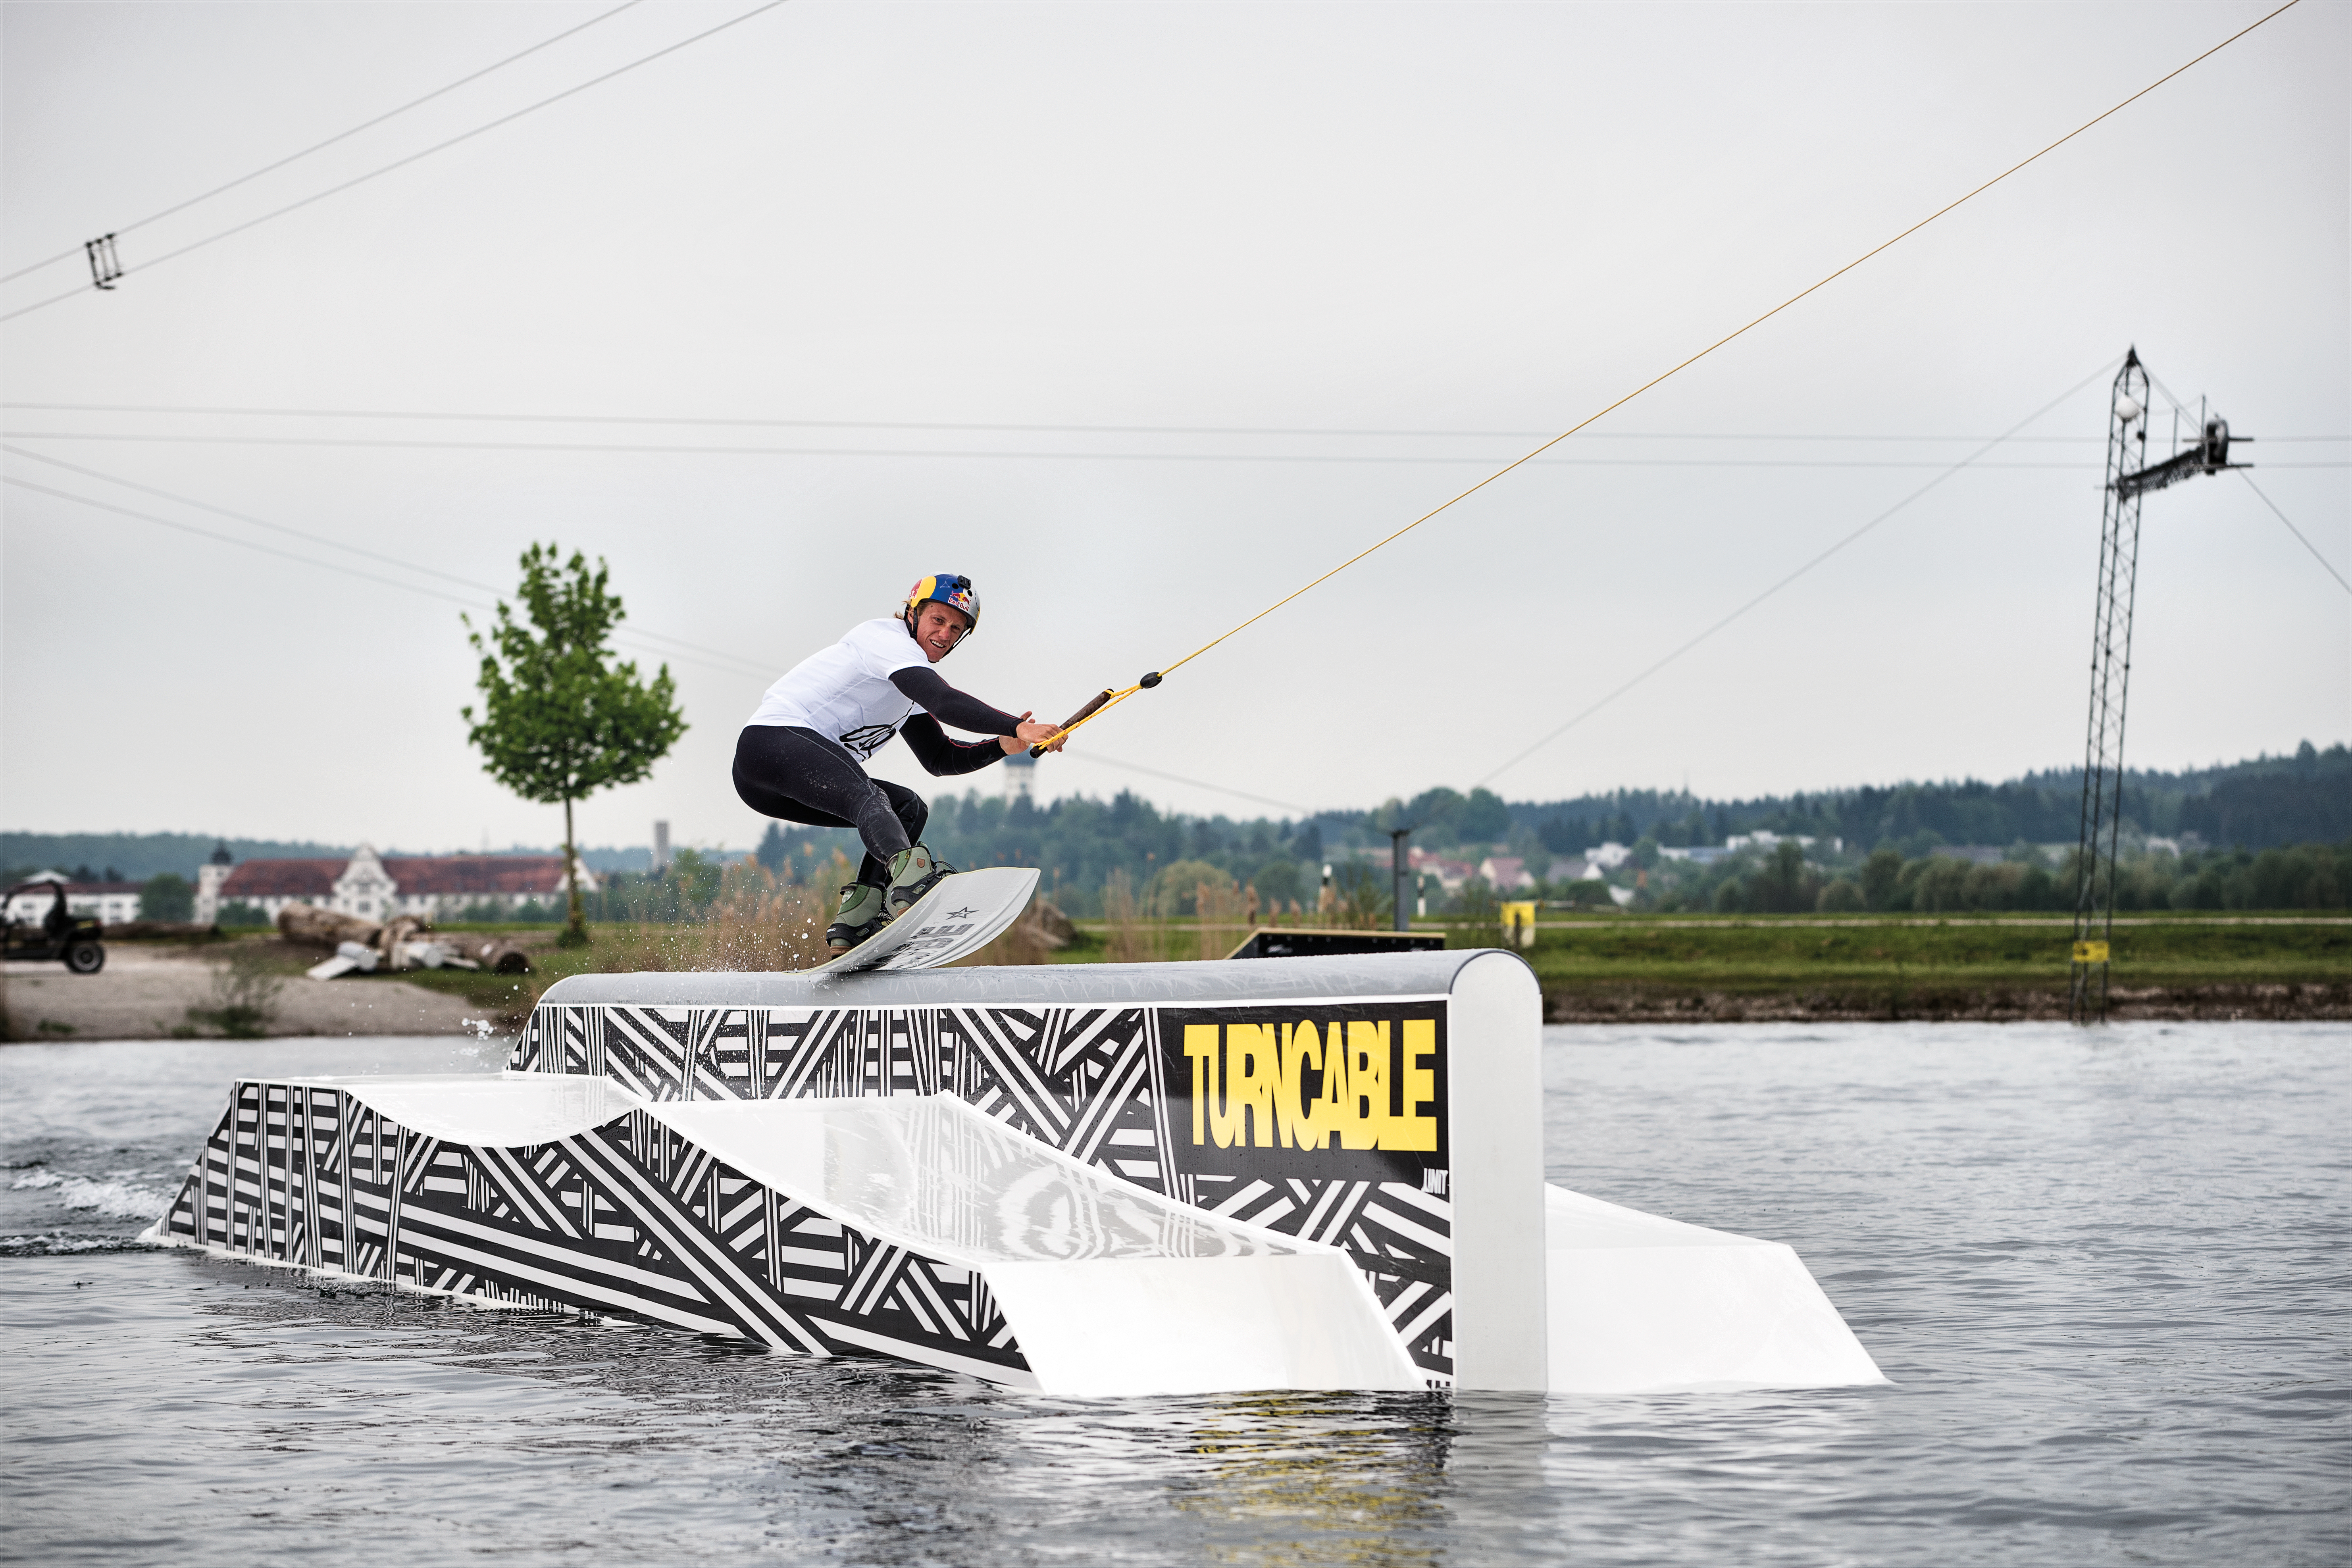 Find your perfect wakeboard stance